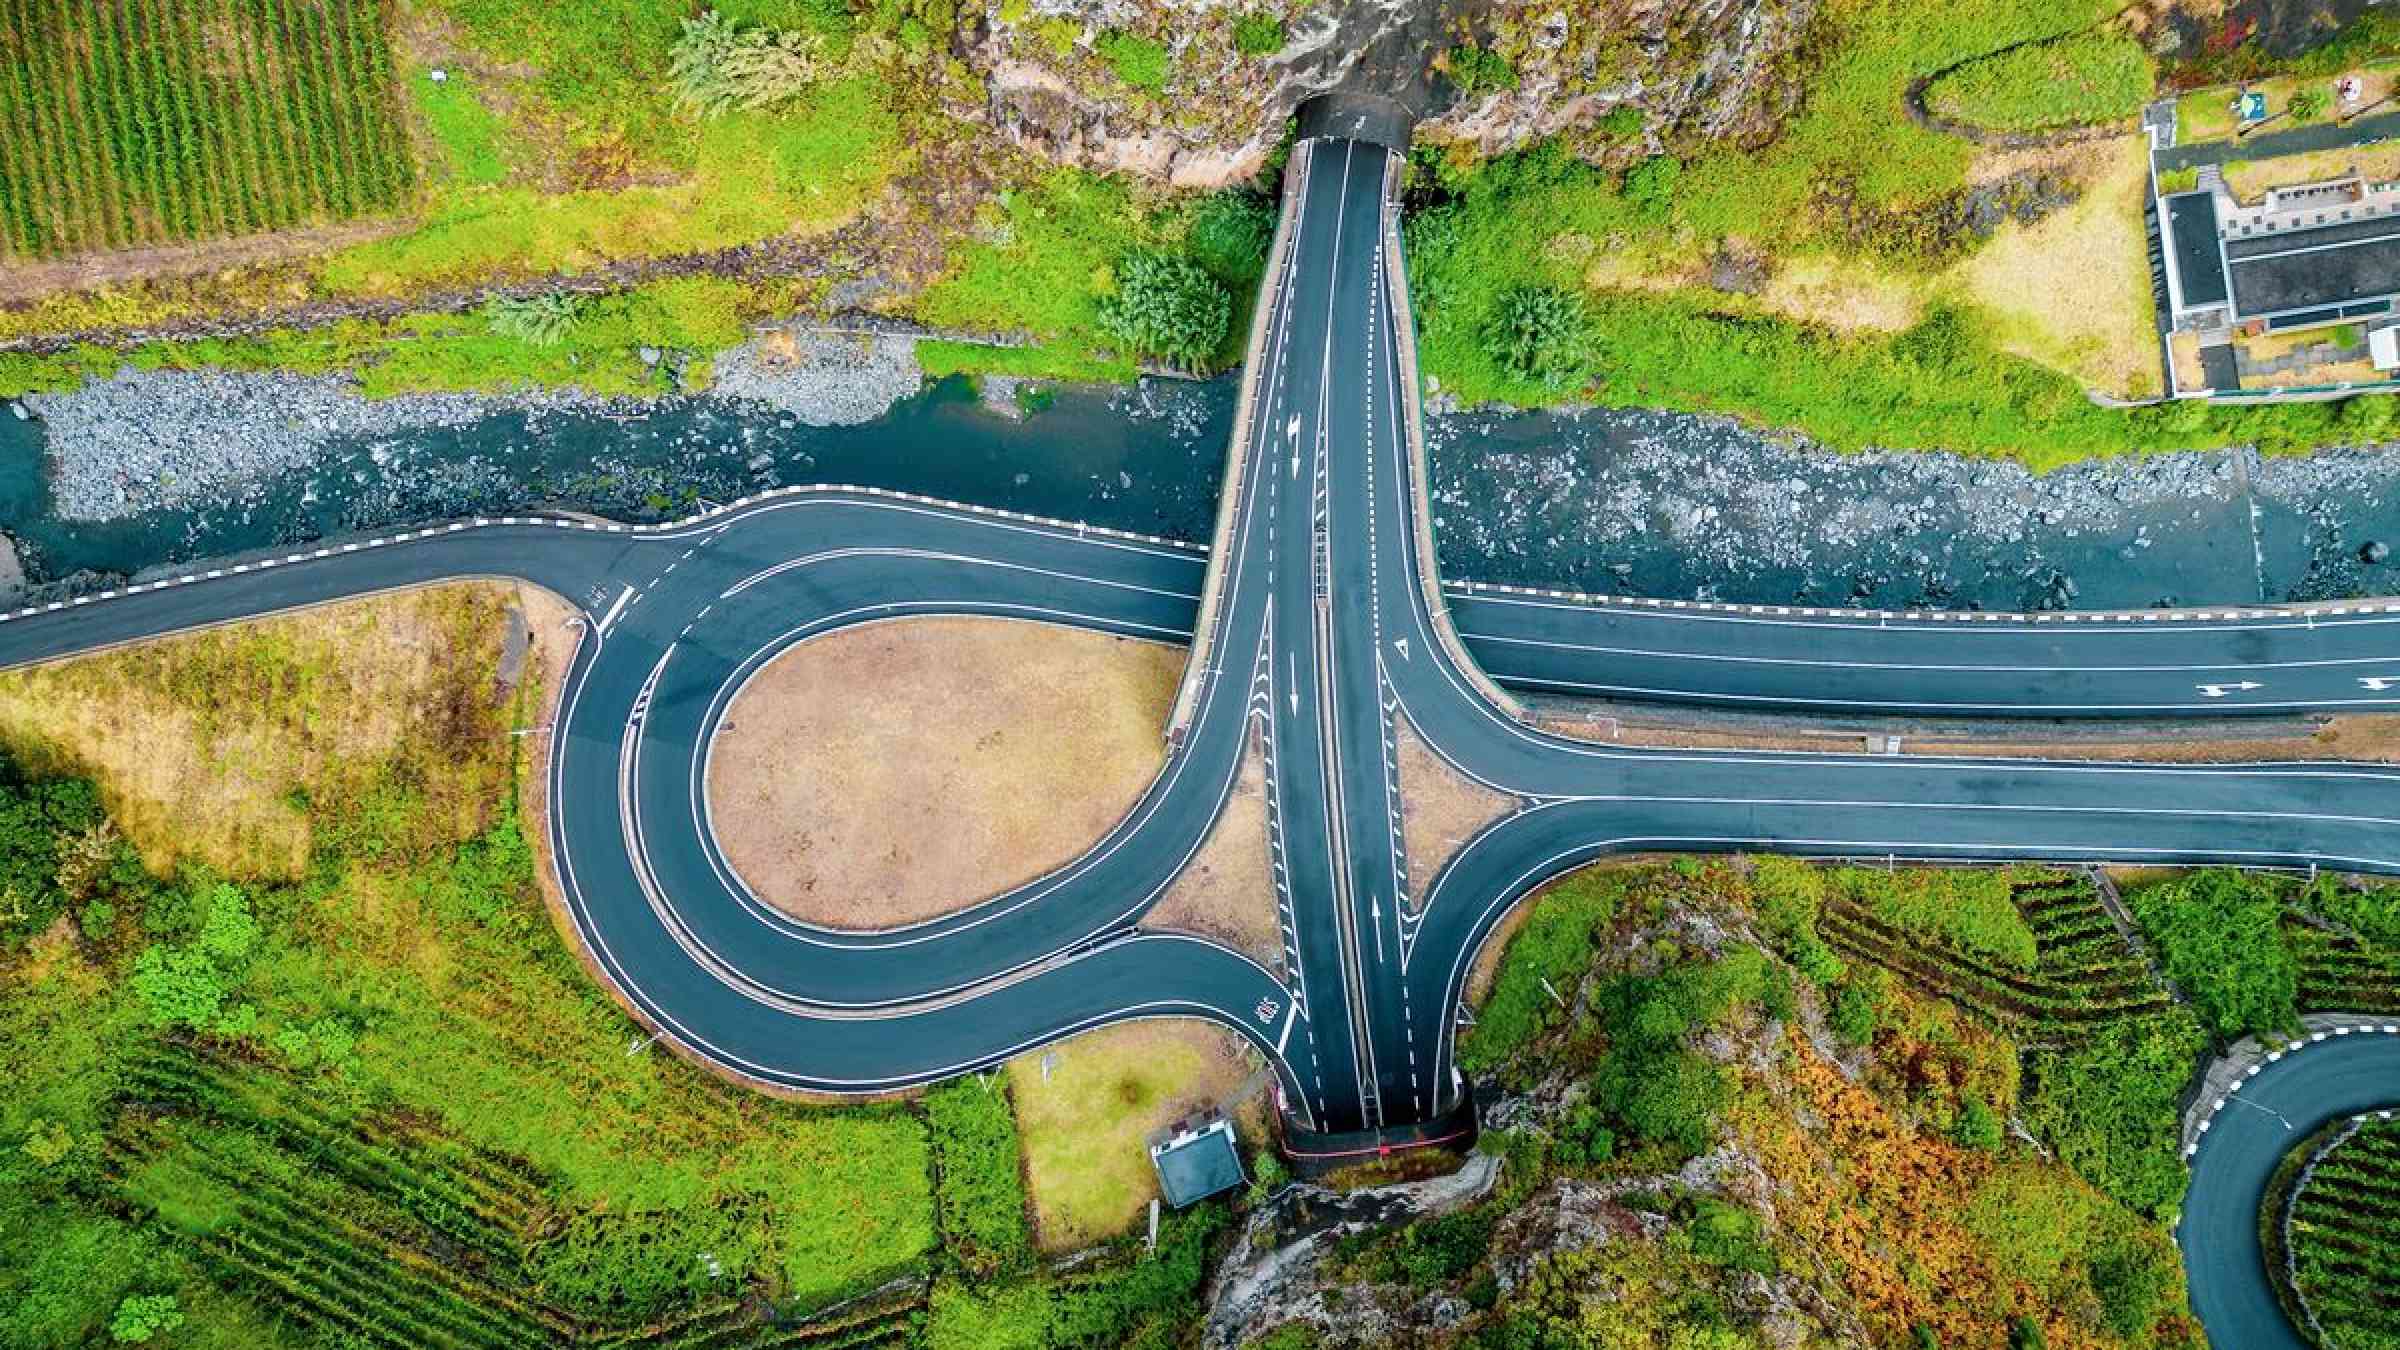 Bird's eye view of the exit of an expressway located between two tunnel portals, Ribeira da Janela, Madeira, Portugal